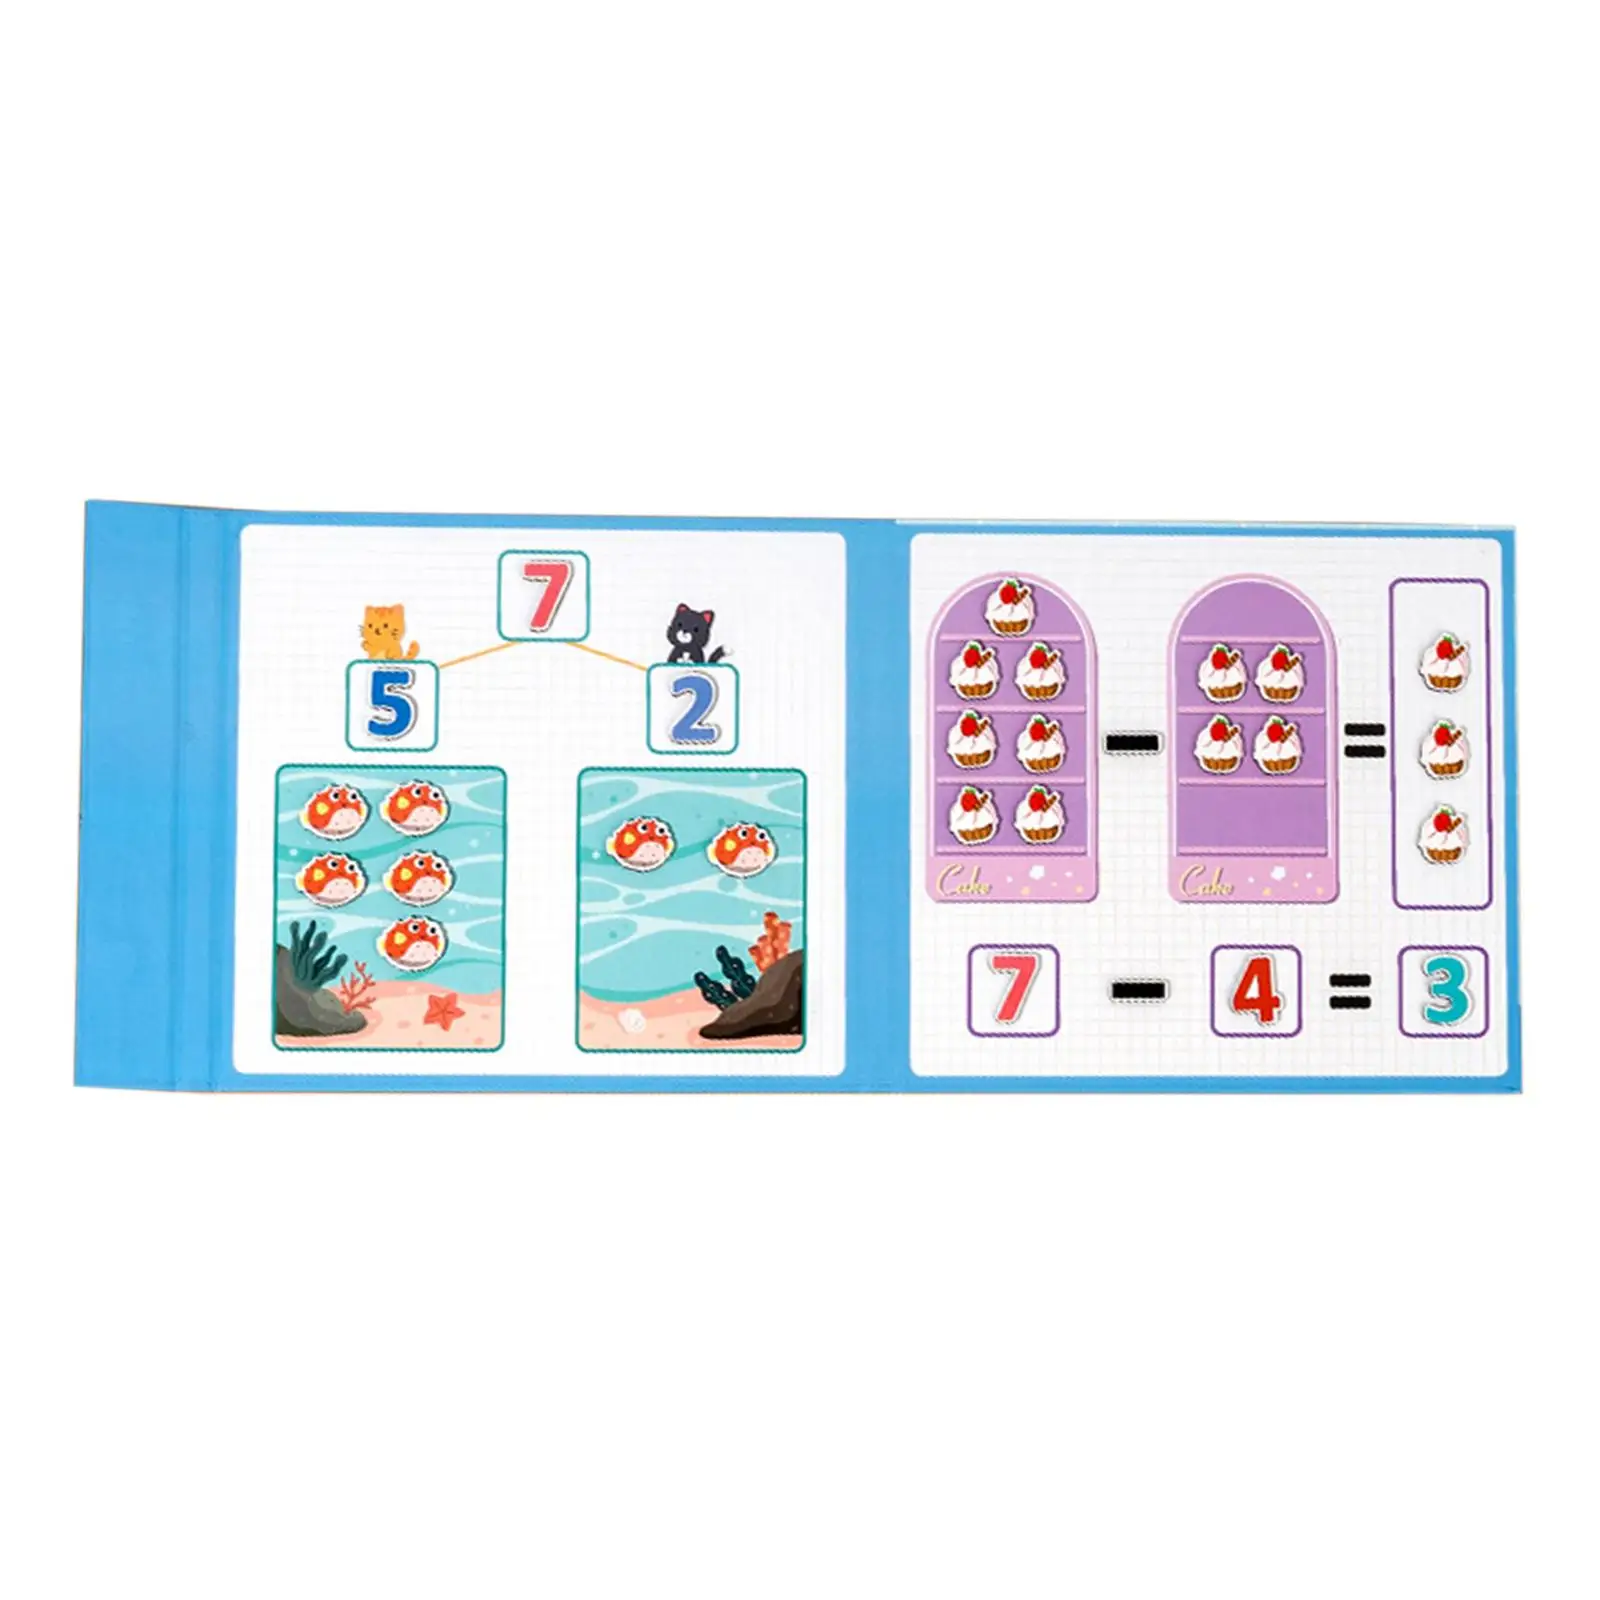 Kids Math Arithmetic Toy Educational Numbers Decomposition Math Toys Counting Toy for Activities Teaching Elementary Girls Boy